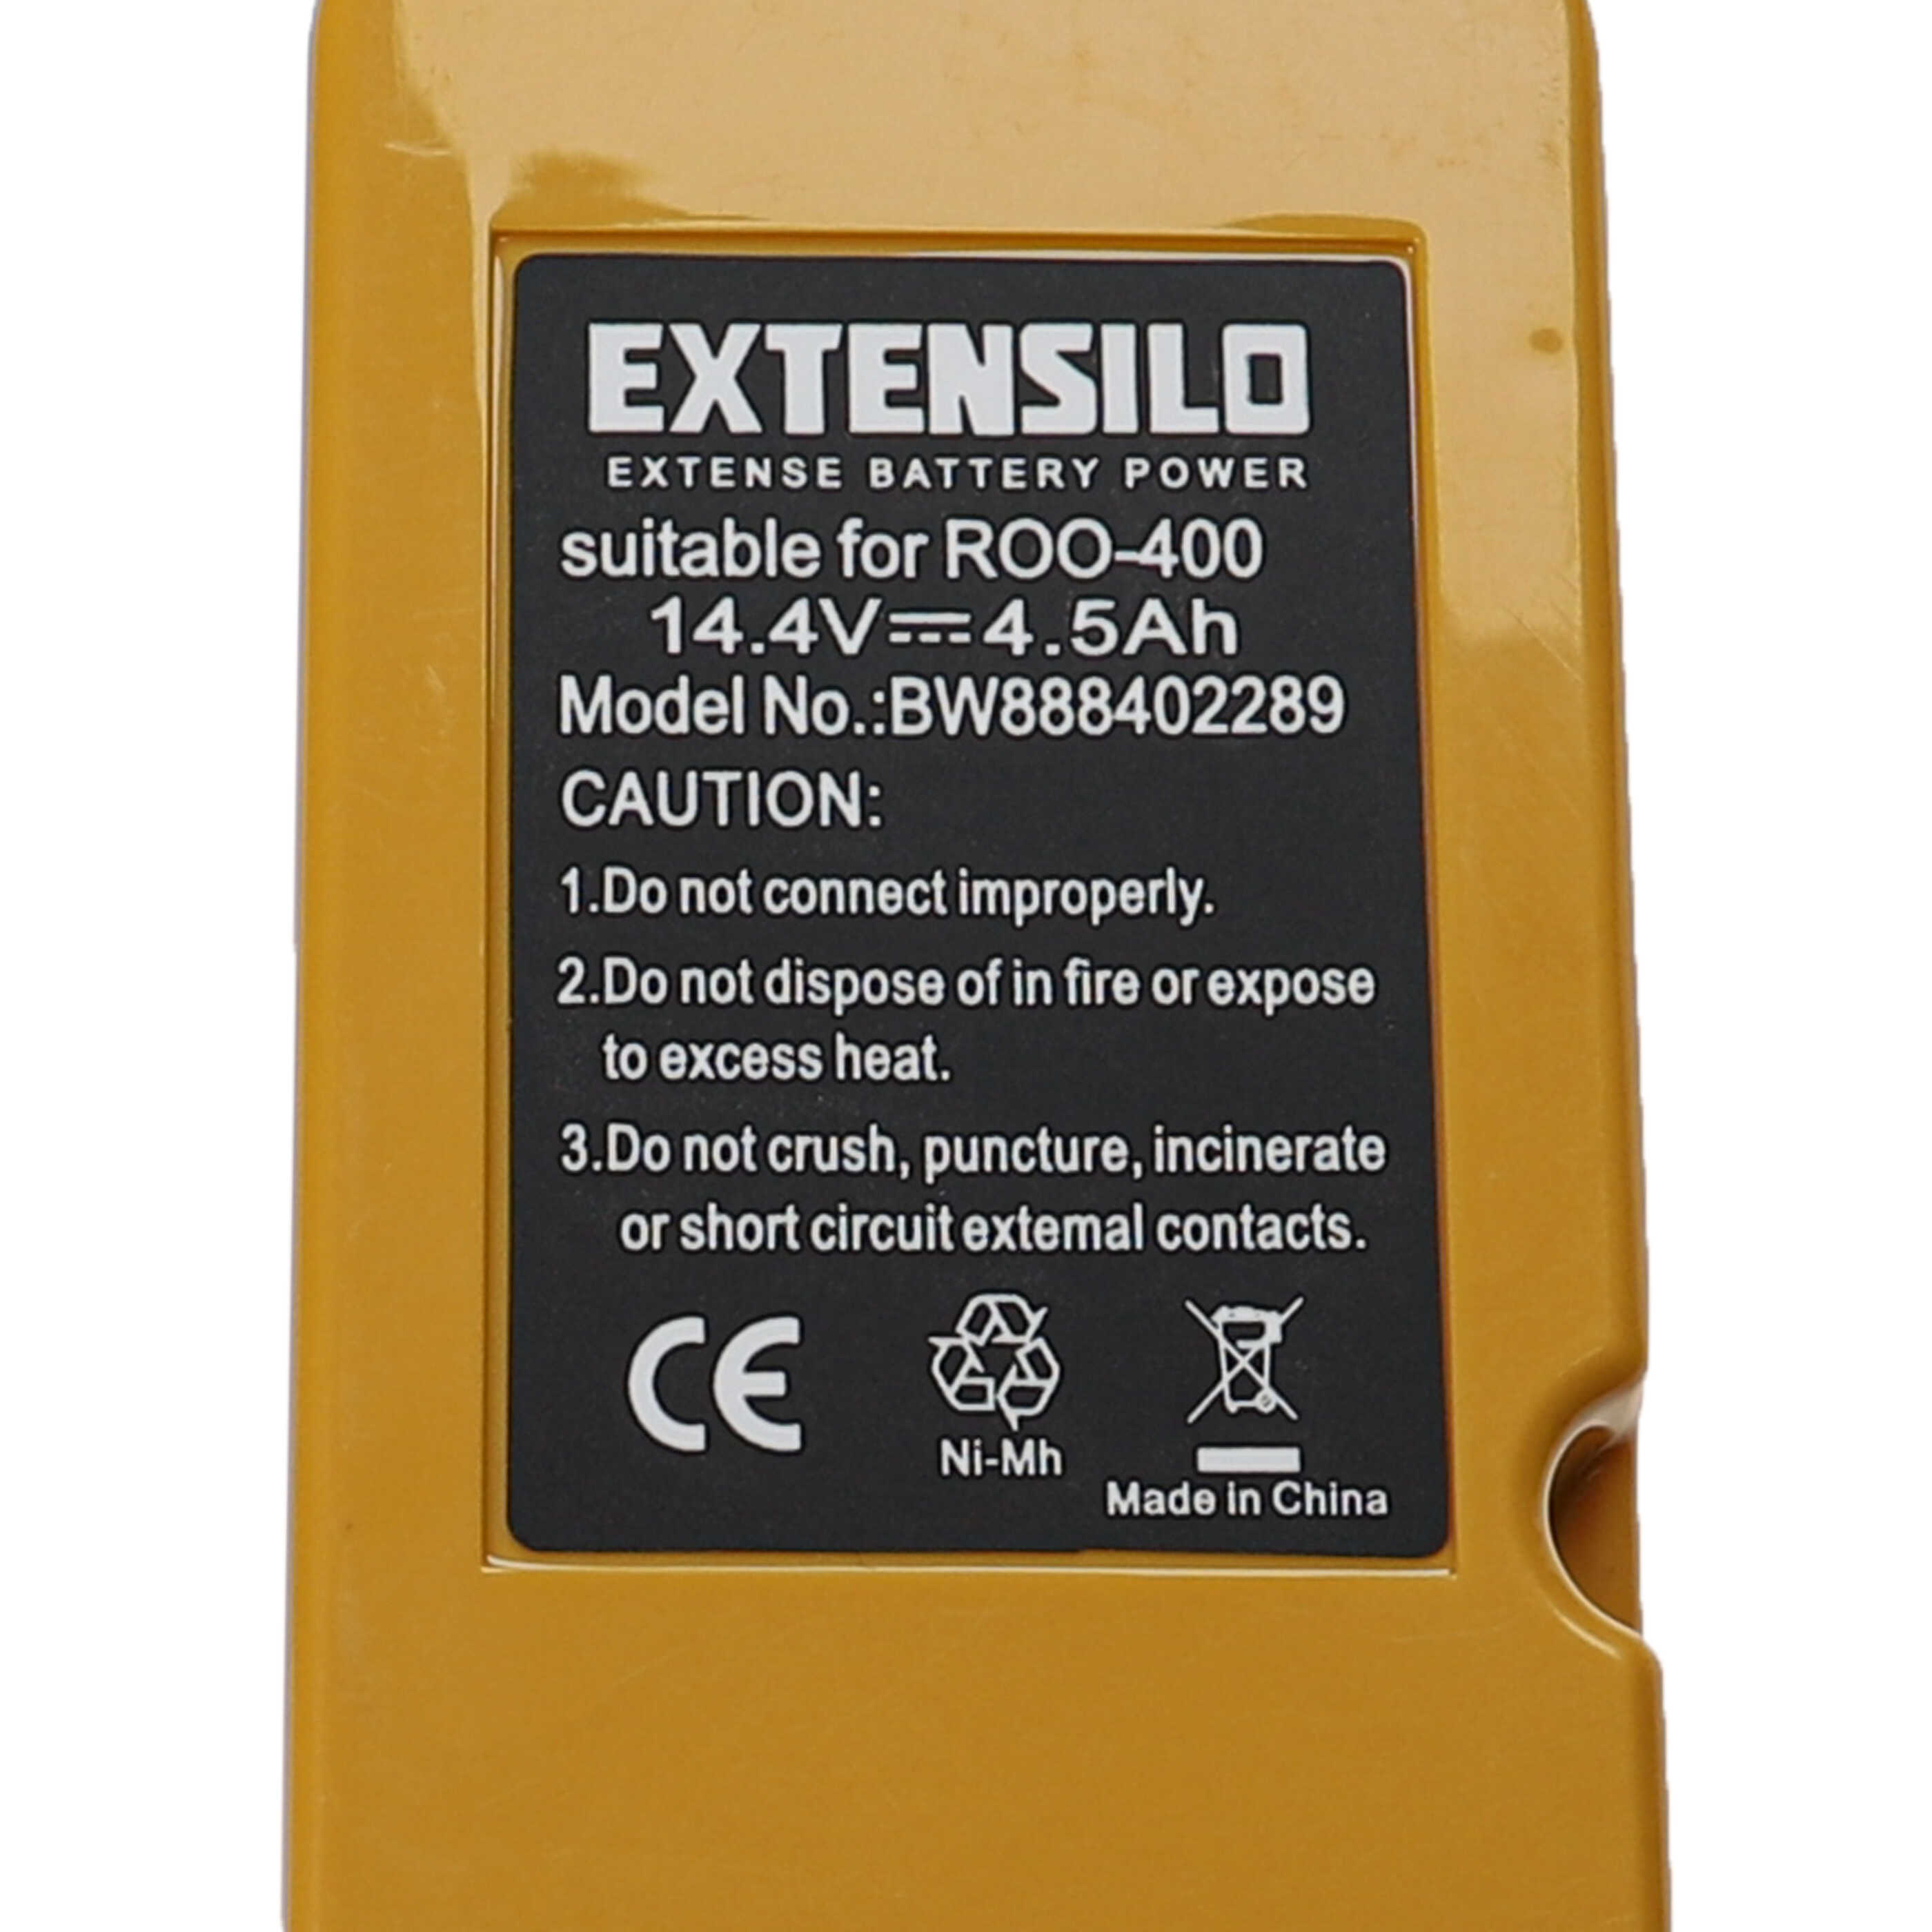 Battery Replacement for APS 4905, NC-3493-919, 11700, 17373 for - 4500mAh, 14.4V, NiMH